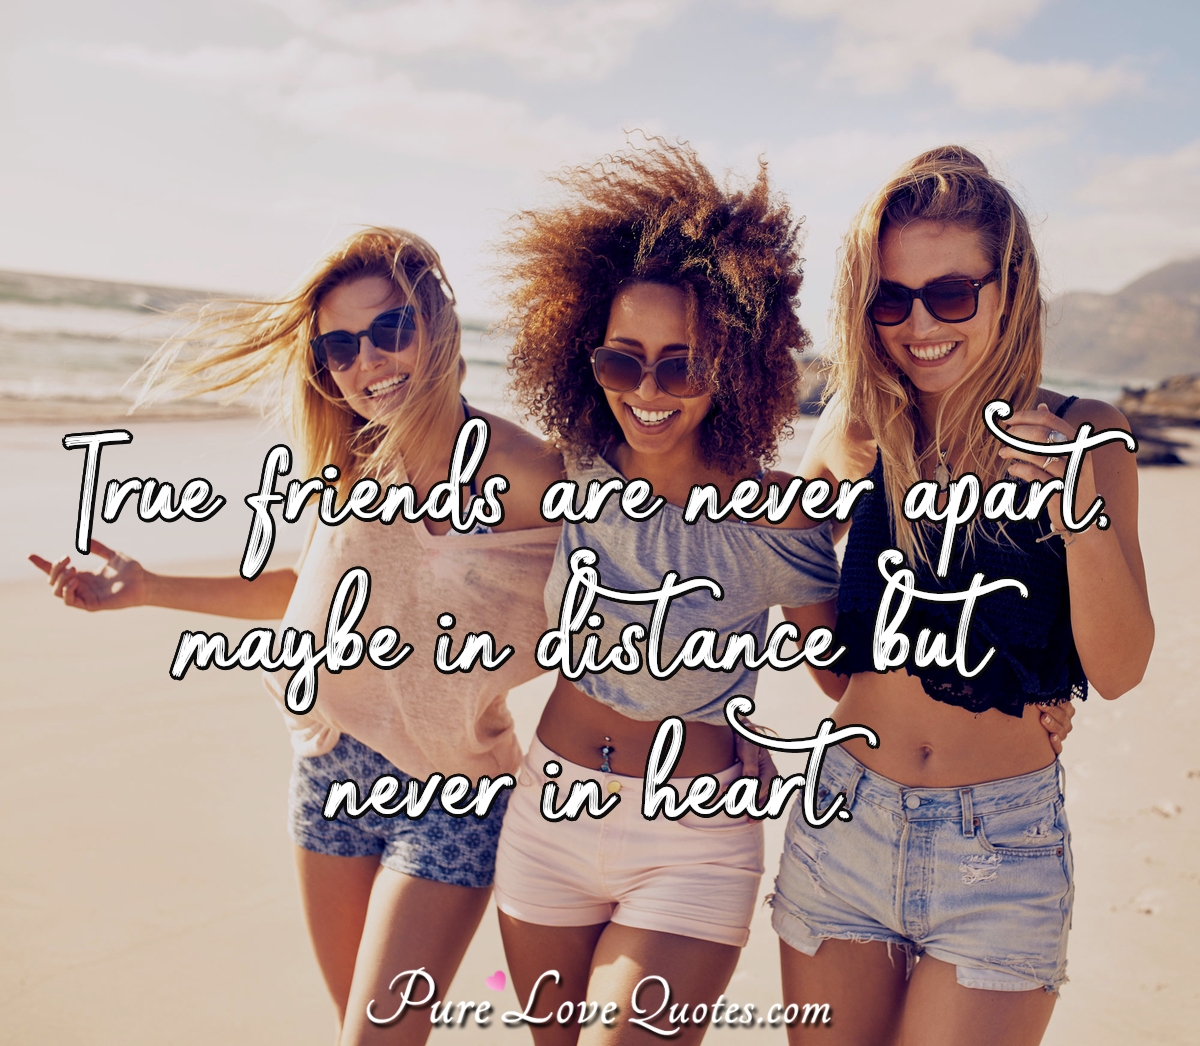 True friends are never apart, maybe in distance but never in heart. - Anonymous